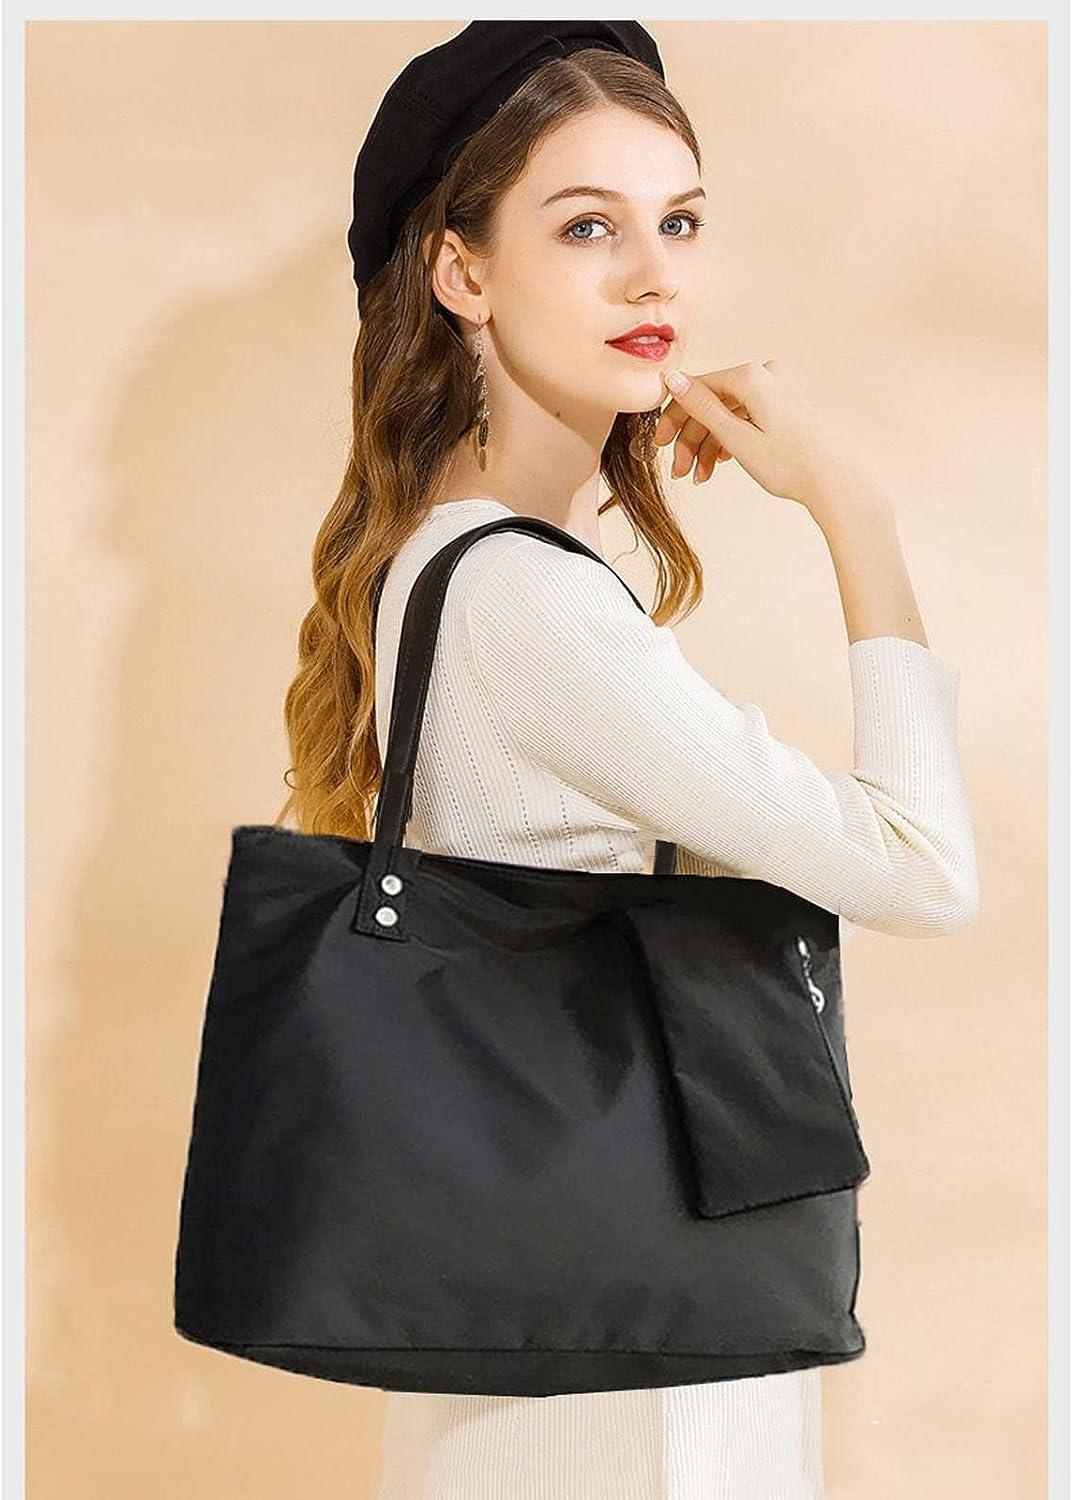 Tote bags & Shoppers - nylon - women - 442 products | FASHIOLA INDIA